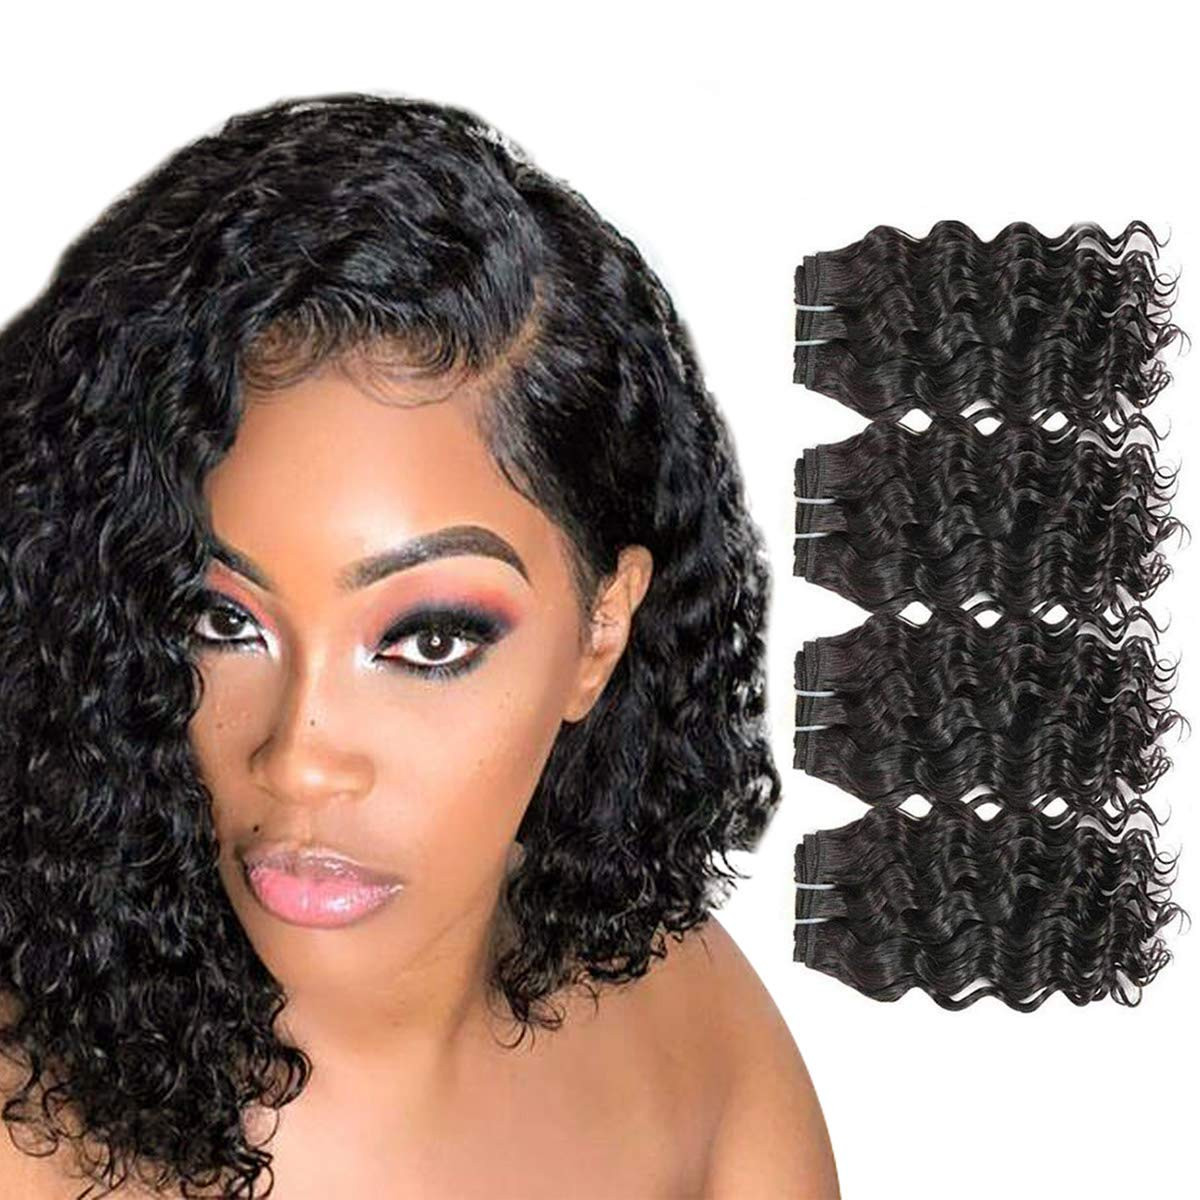 deep wave short hairstyles pictures Pin on $layed hair - Sehat Bugar ...